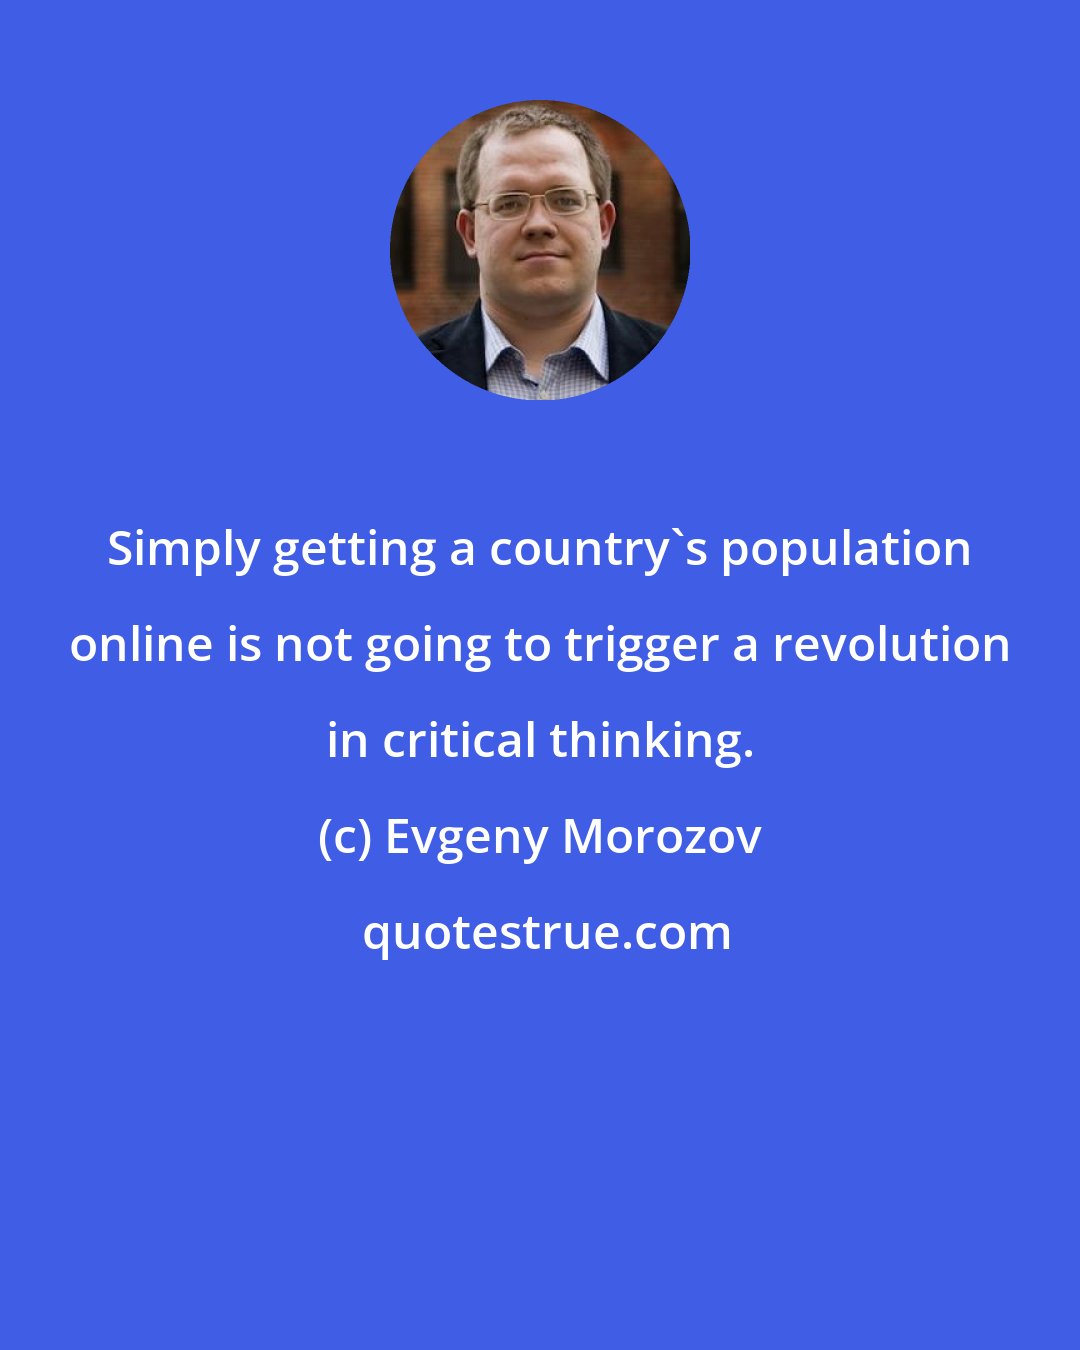 Evgeny Morozov: Simply getting a country's population online is not going to trigger a revolution in critical thinking.